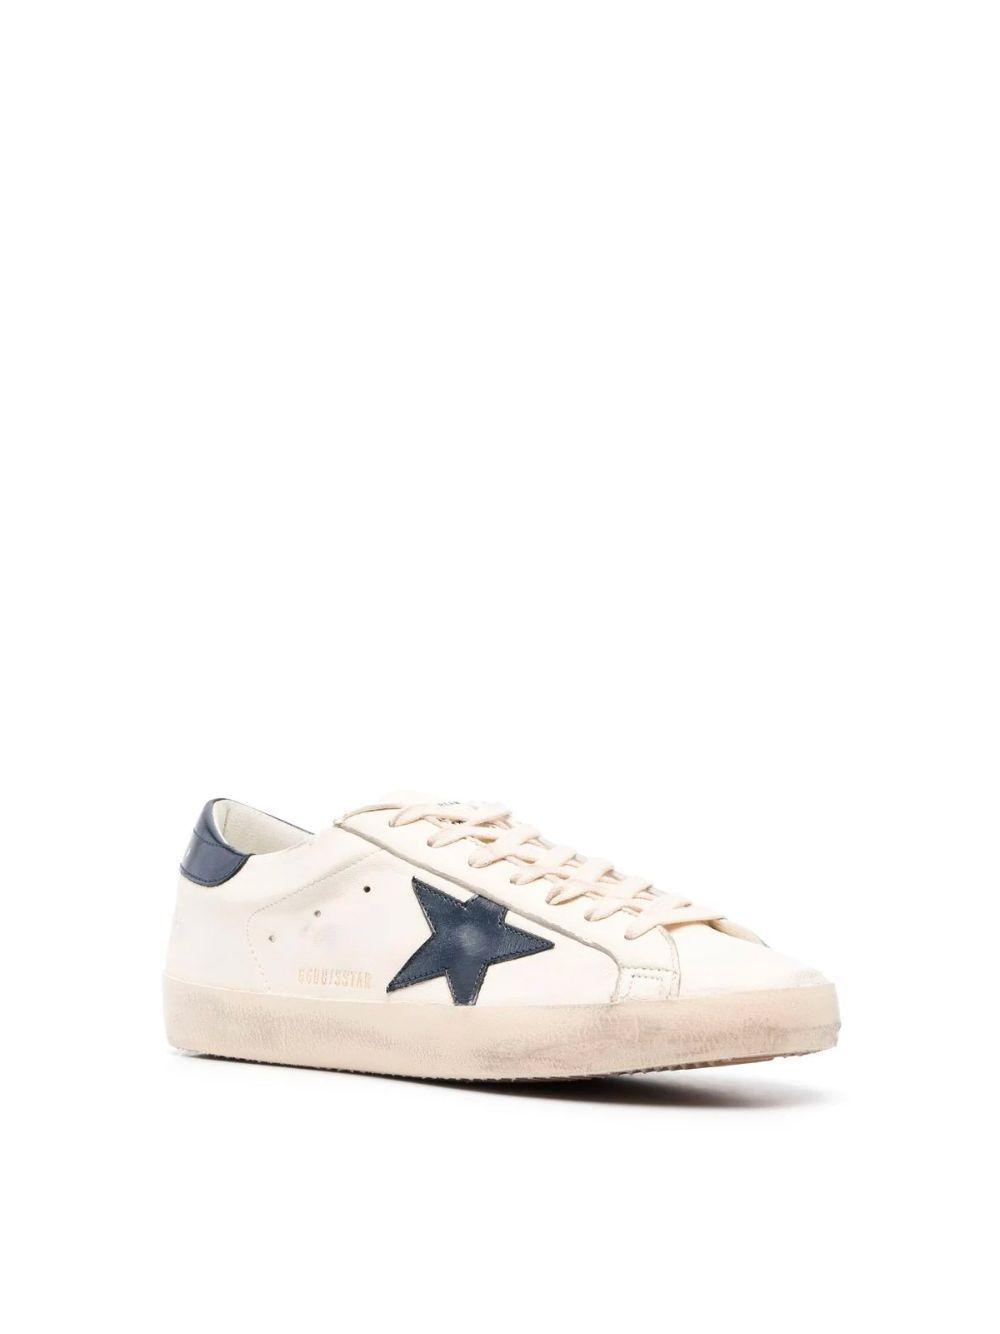 Golden Goose Super-star Nappa Upper Shiny Leather Star And Heel in